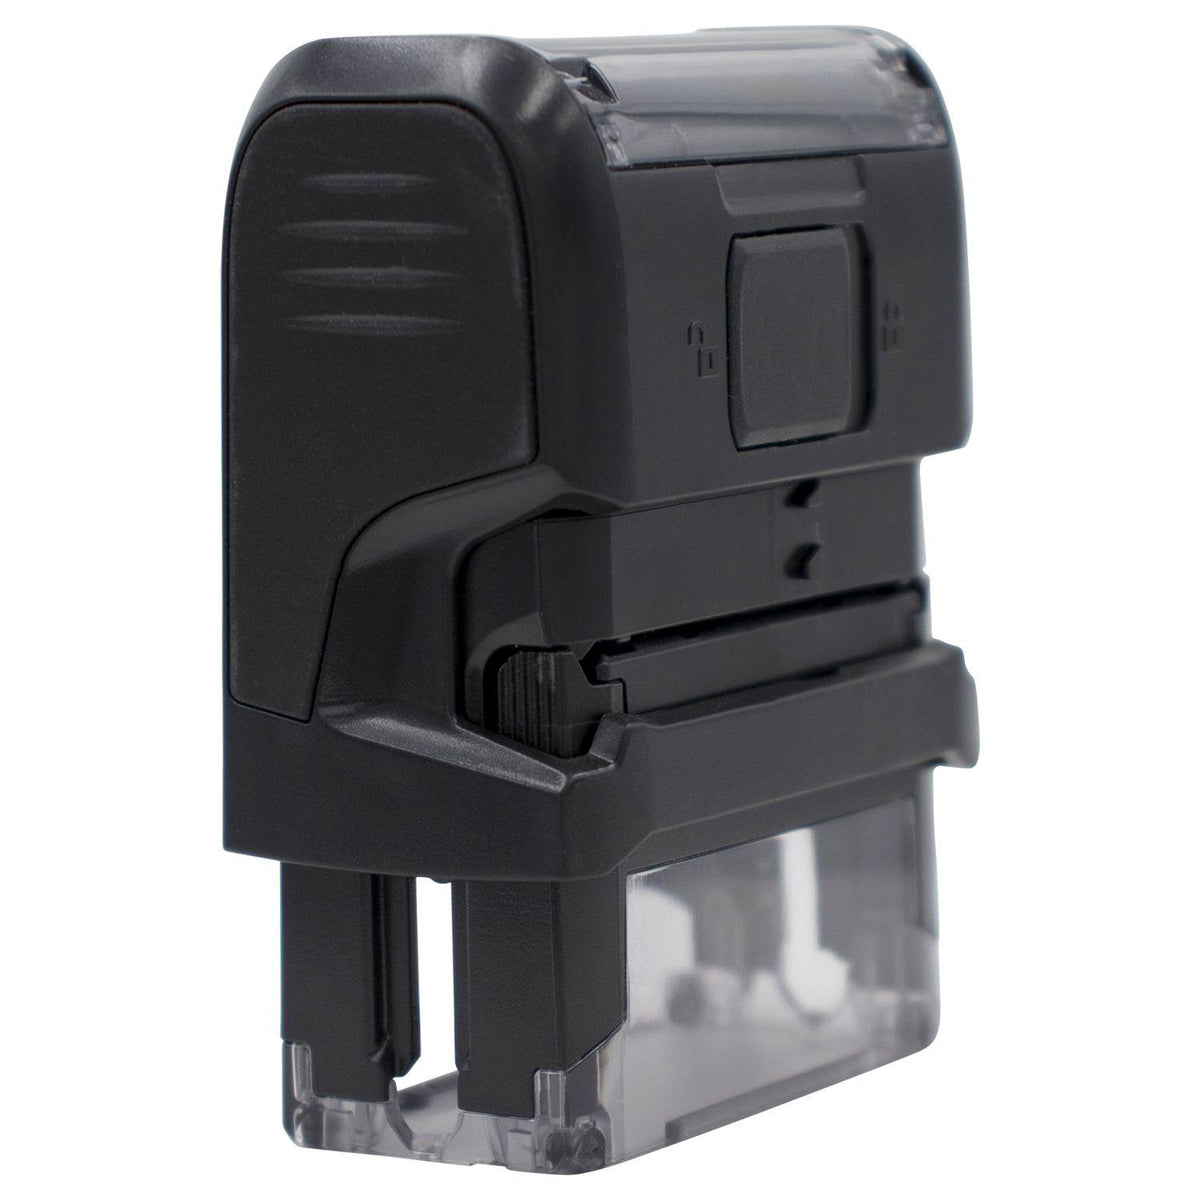 Large Self Inking Aetna Stamp Back View